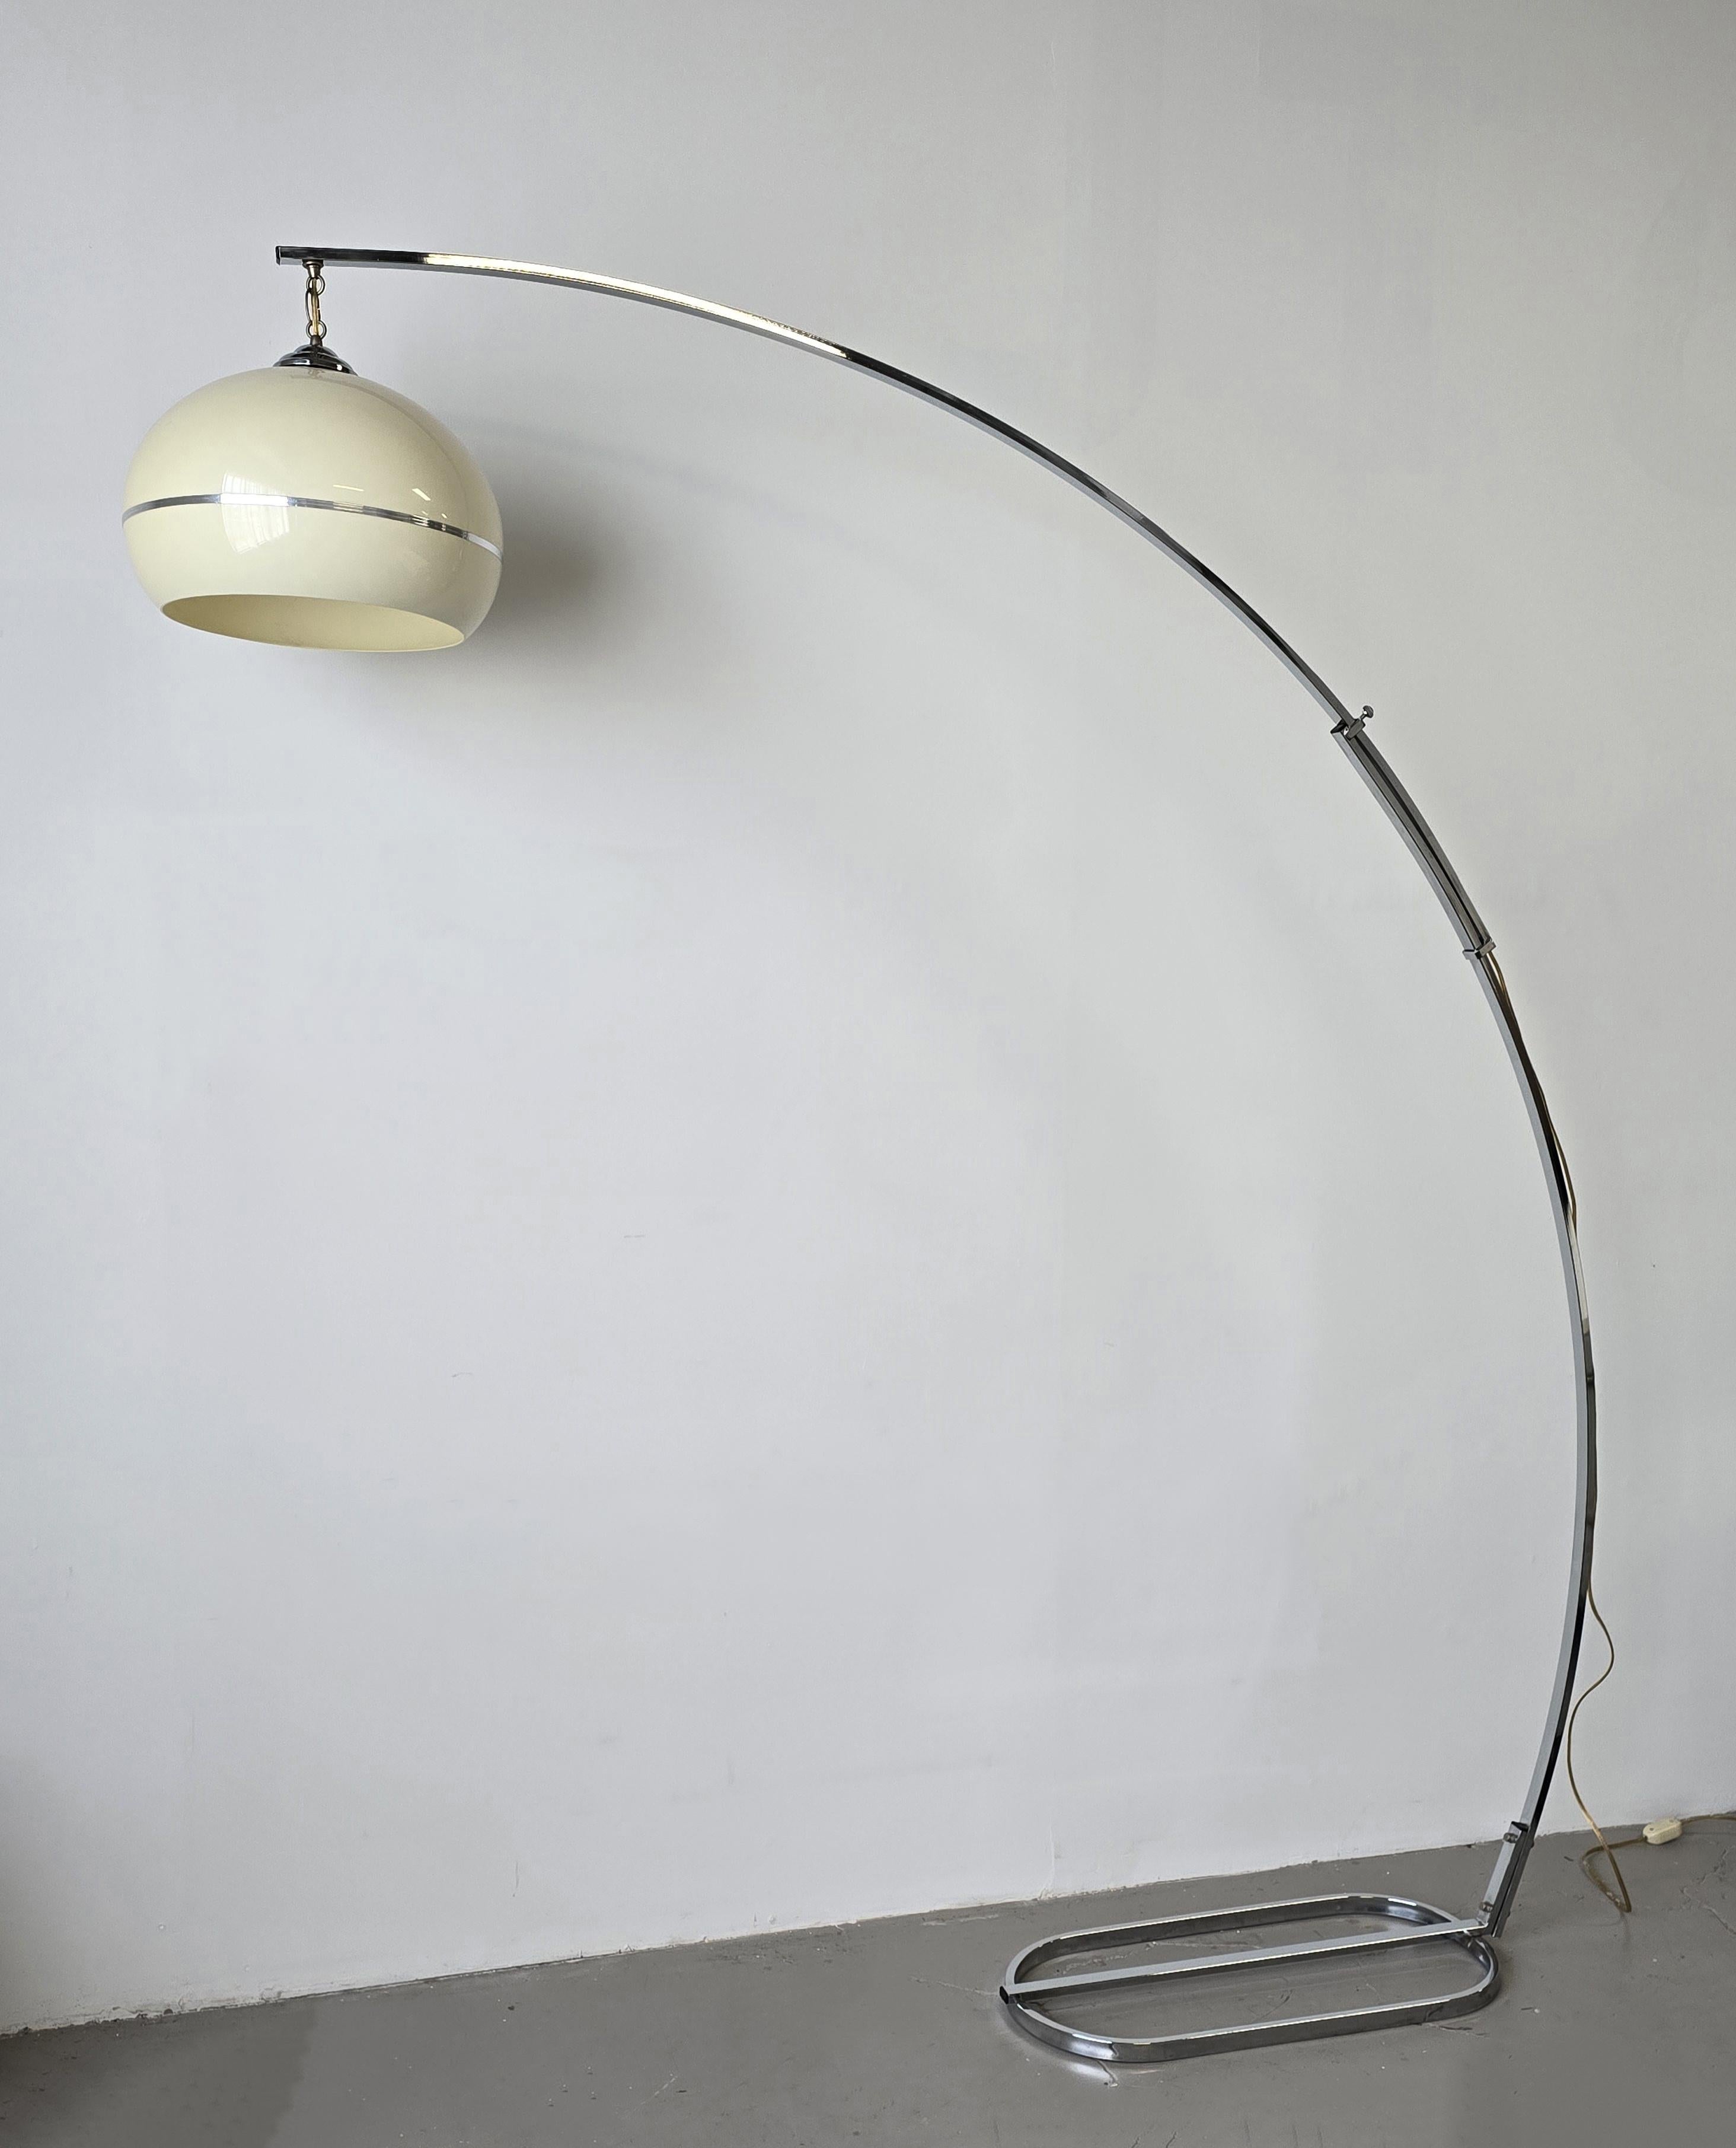 Stunning space age chrome and acrylic arched extendable floor lamp, made in the 1970s. This amazing space age style lamp is crafted with precision, featuring a chrome body with an acrylic shade. It features an arched shape which is extendable and